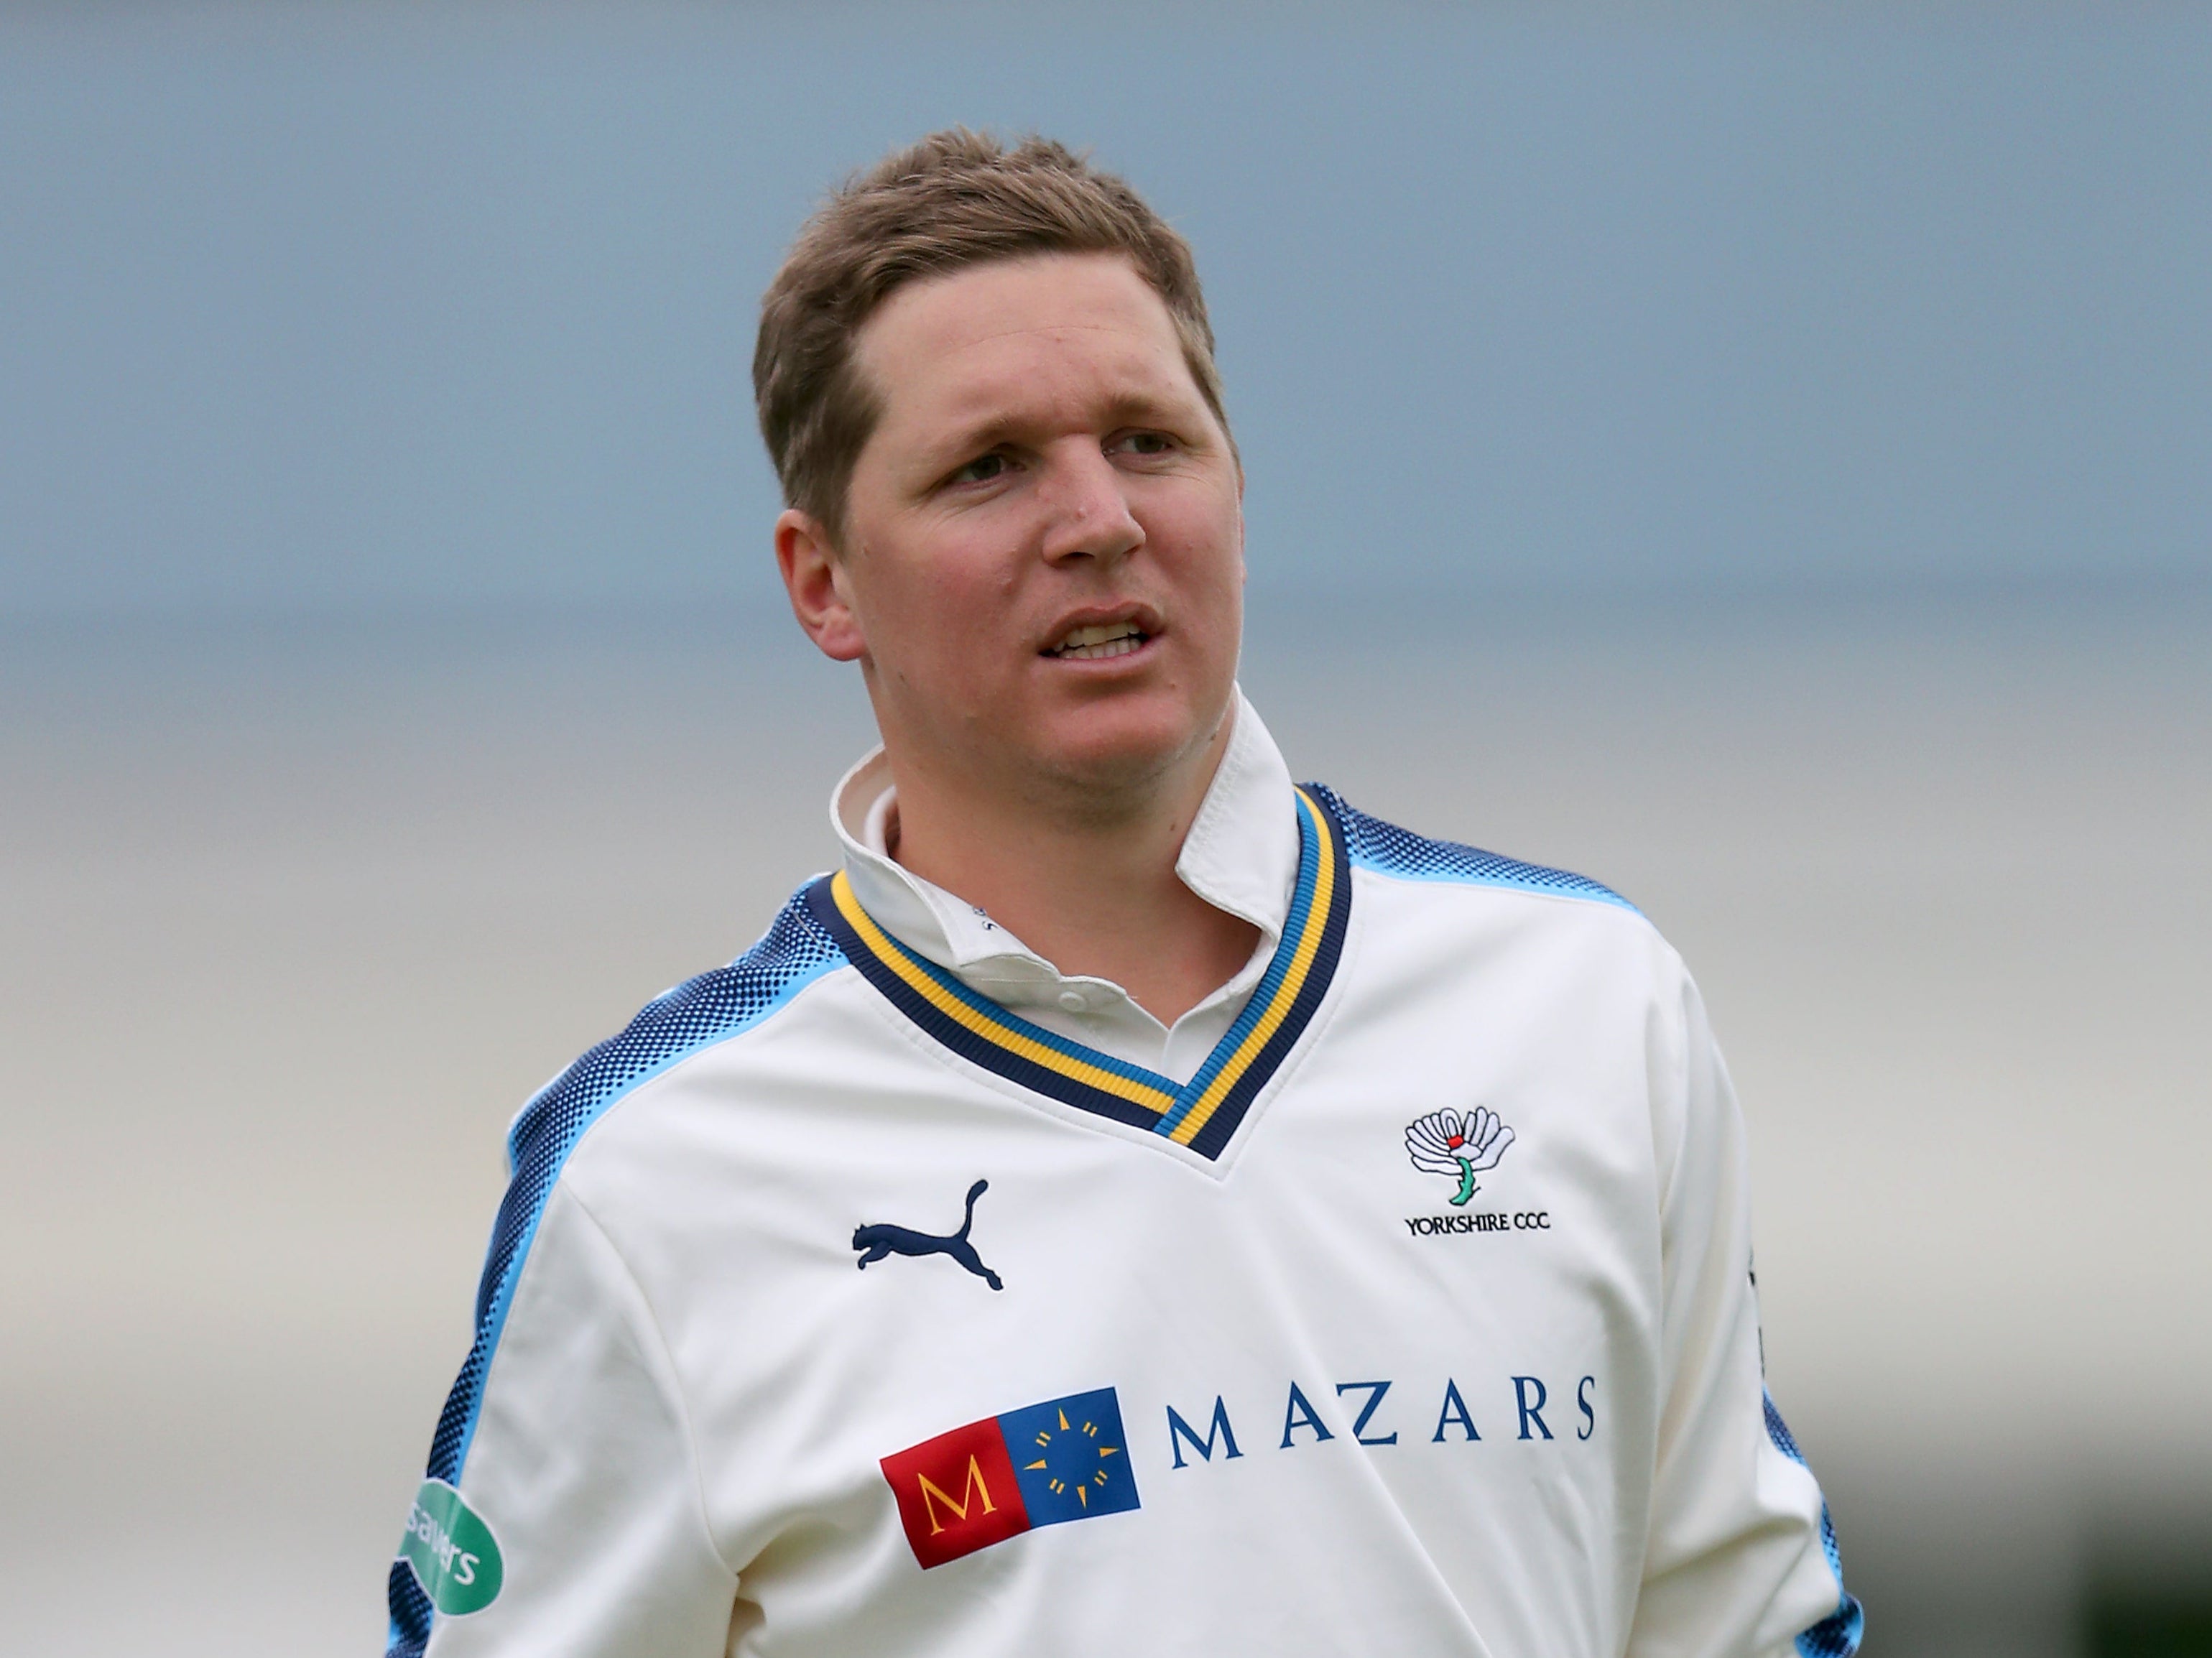 Gary Ballance has admitted to using a racial slur (Mike Egerton/PA)